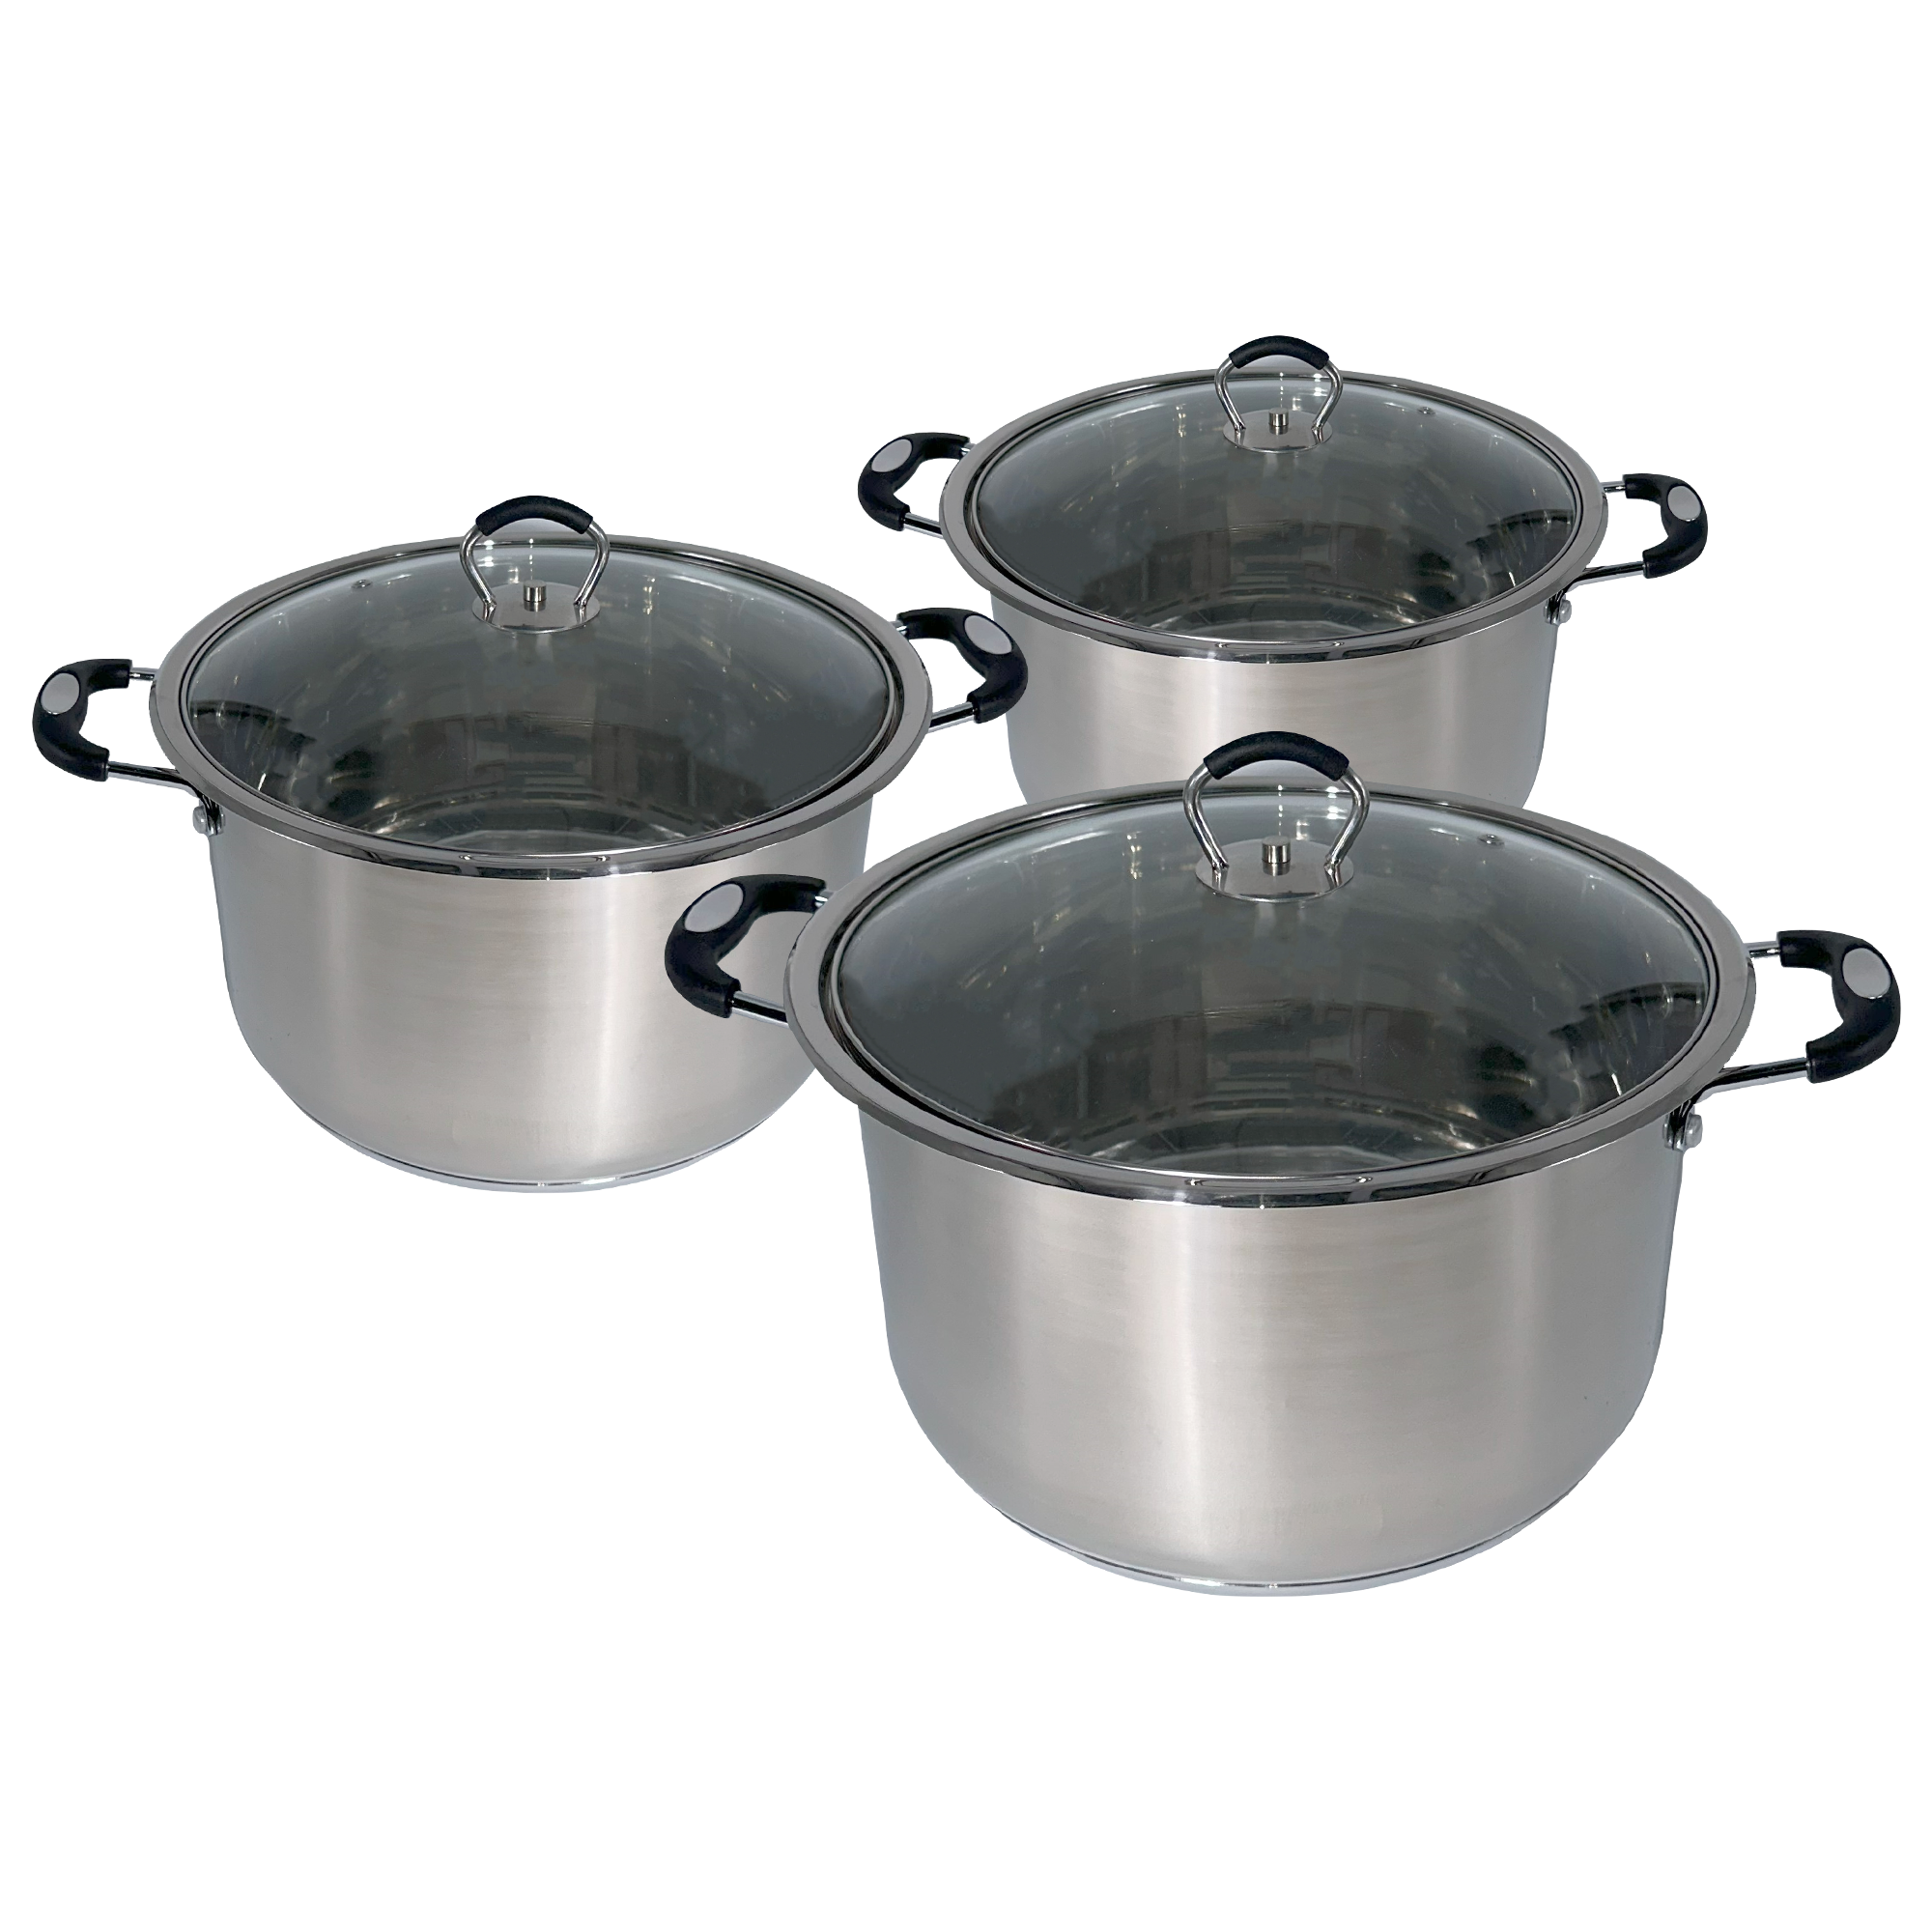 Glaxa Stainless Steel Induction Base Casserole/Pots With Lid - 3 Pc Set